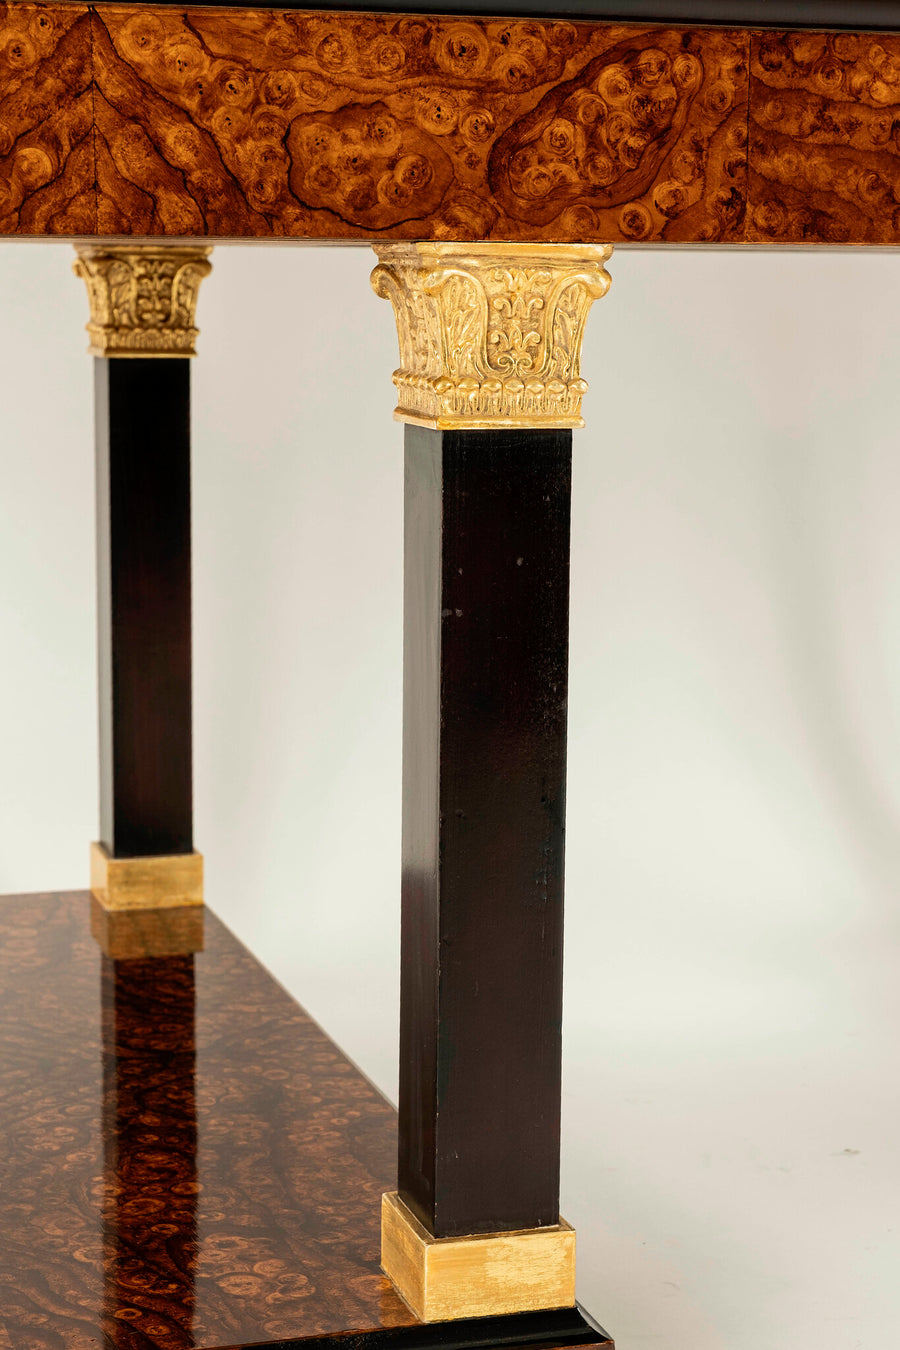 Neoclassical Style Lacquered Burl Wood Desk